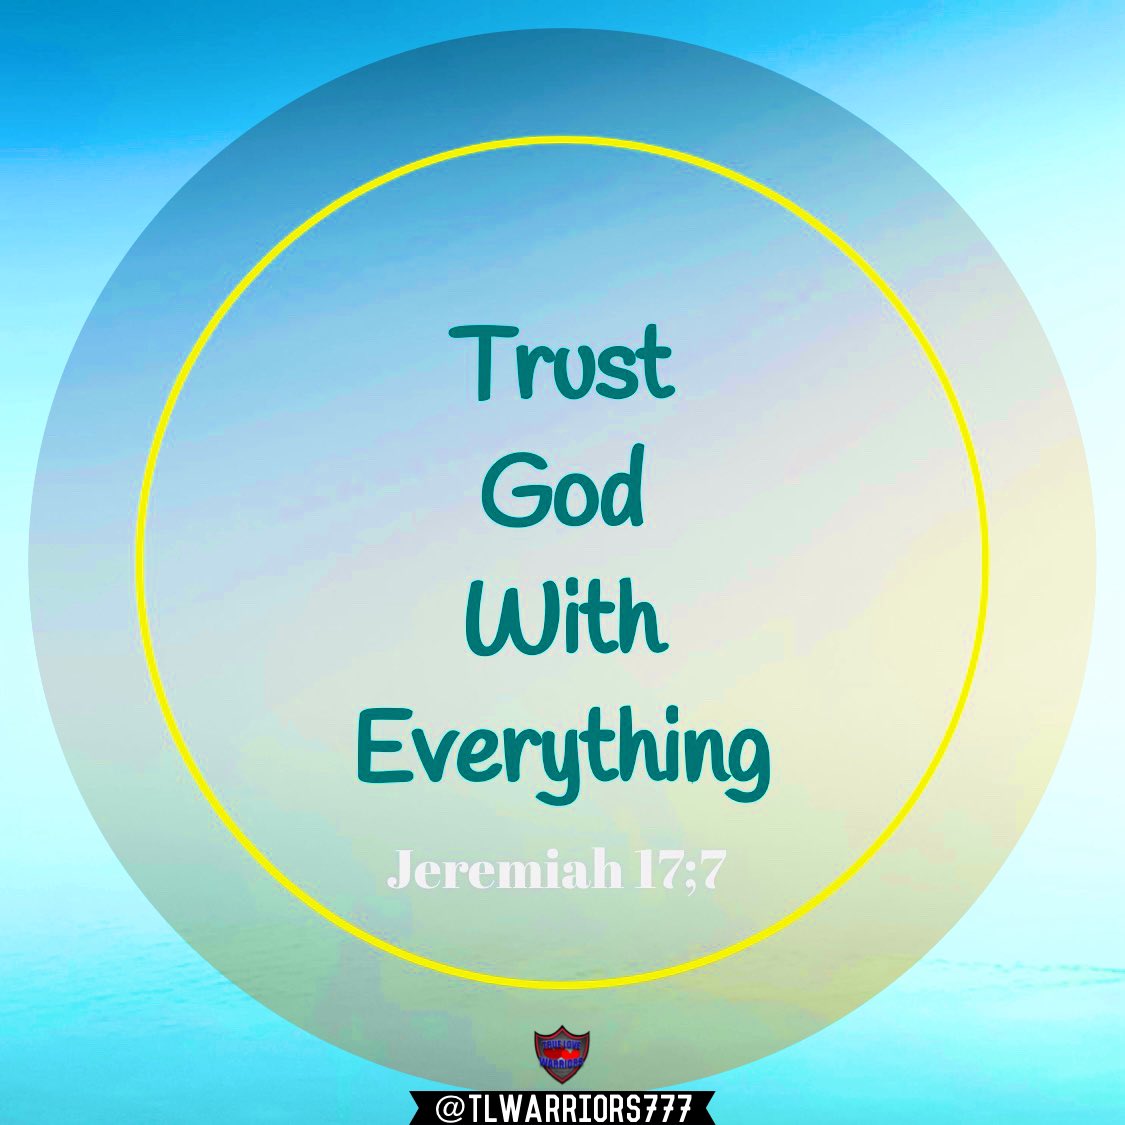 “But blessed is the man who trusts in the Lord, whose confidence is in Him.” Jeremiah 17:7